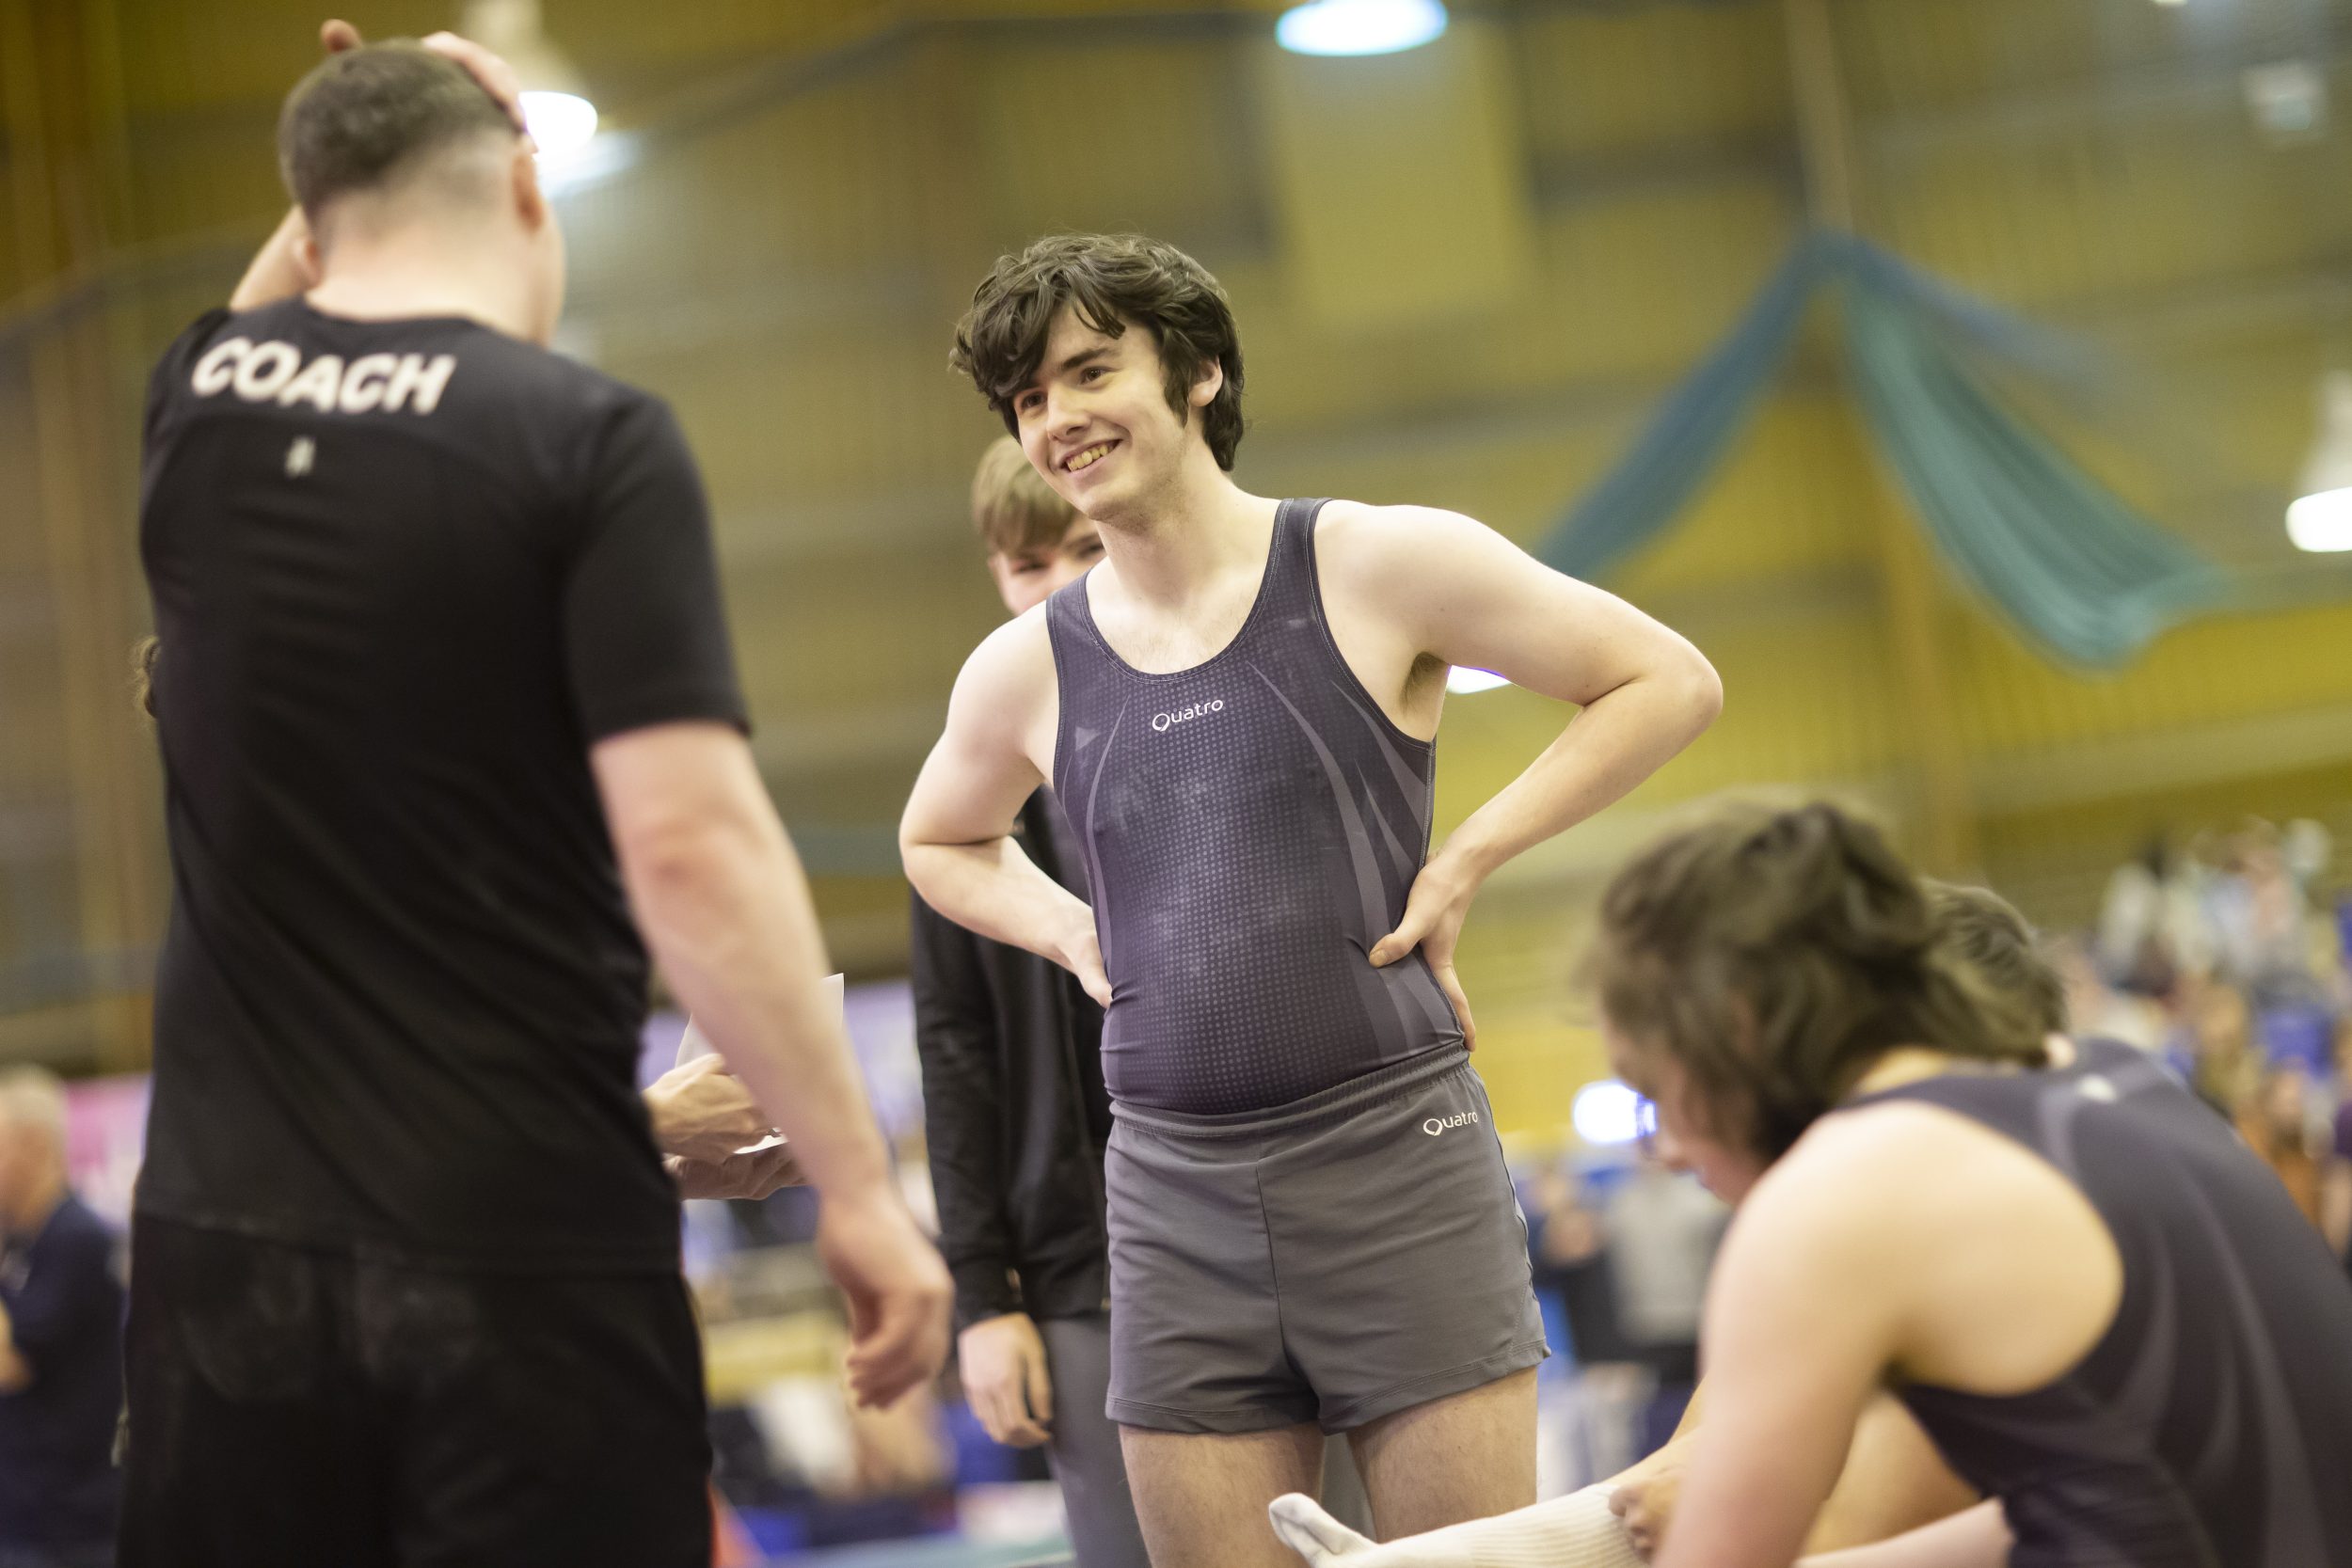 Disability gymnast and his coach at a national championships